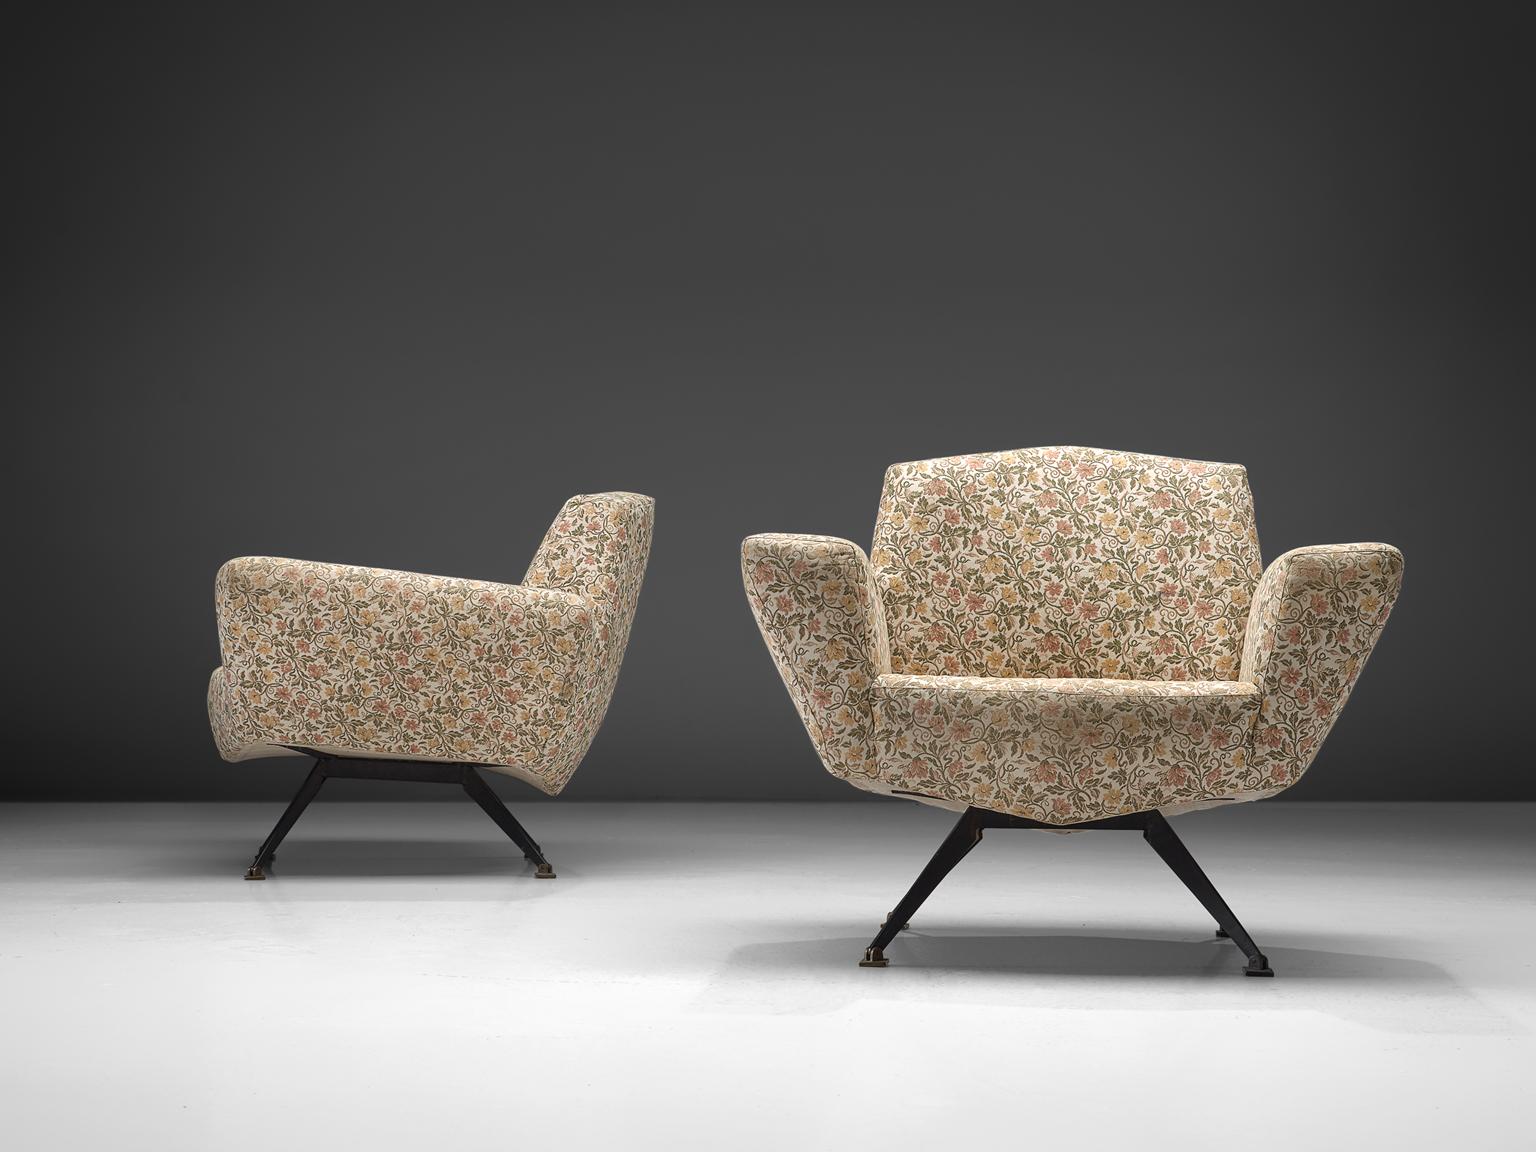 Italian Studio APA for Lenzi Pair of Lounge Chairs in Floral Upholstery